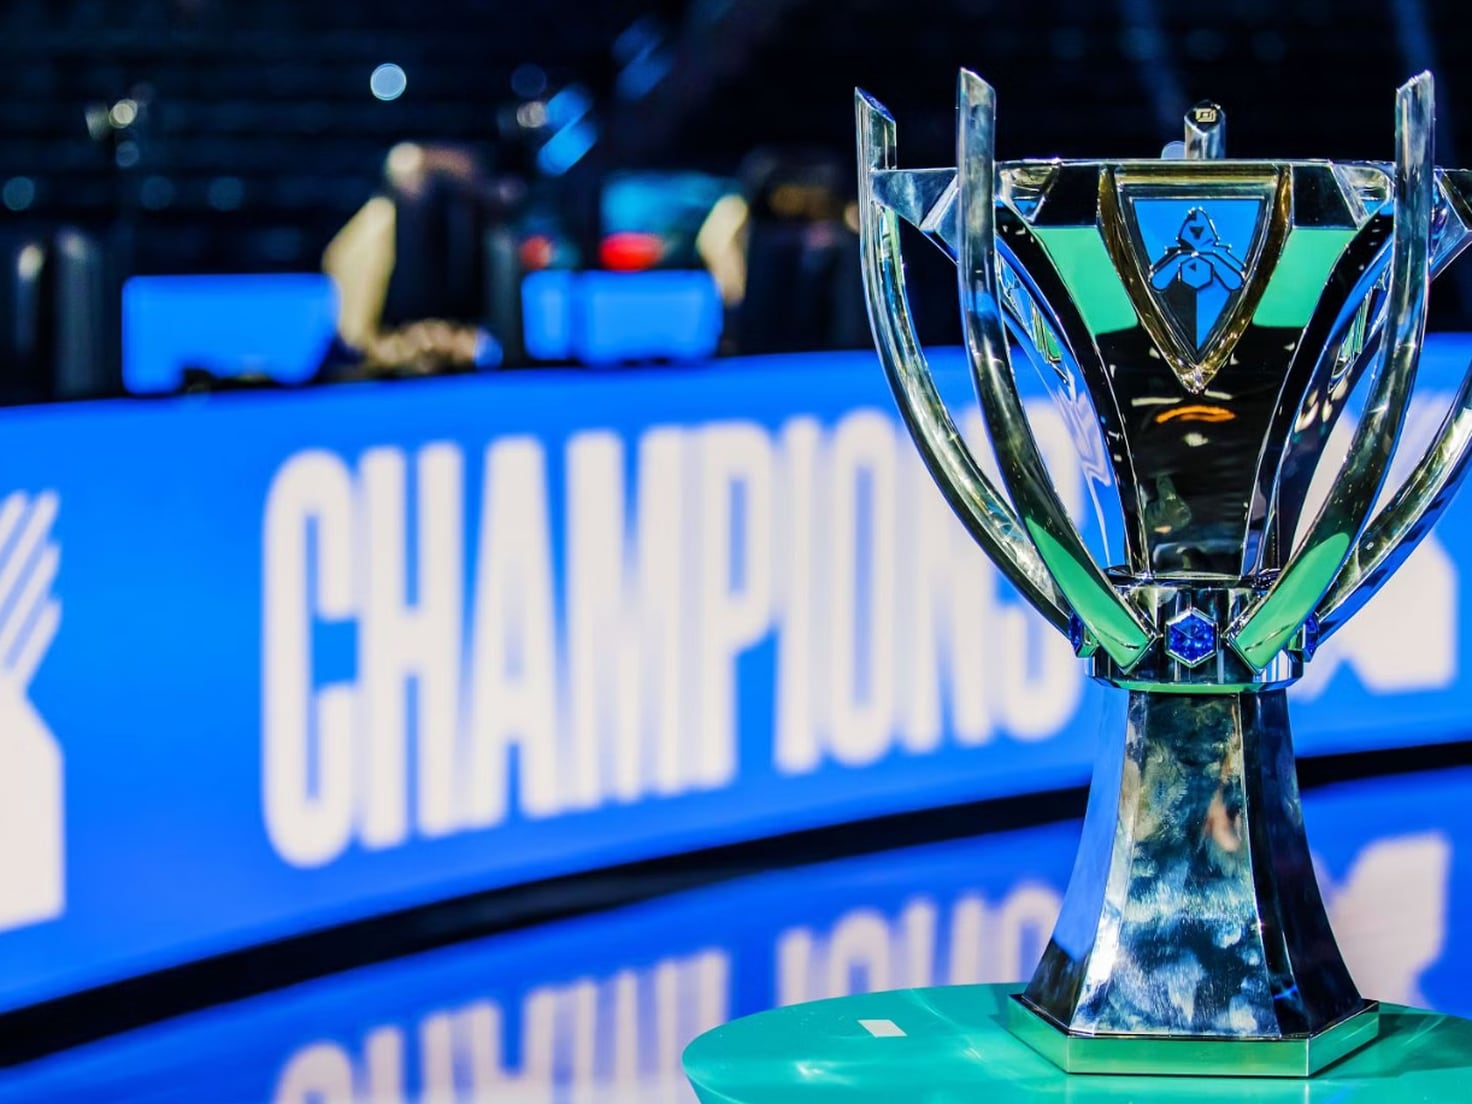 When is LoL Worlds 2023?: Date and time of the matches - Meristation